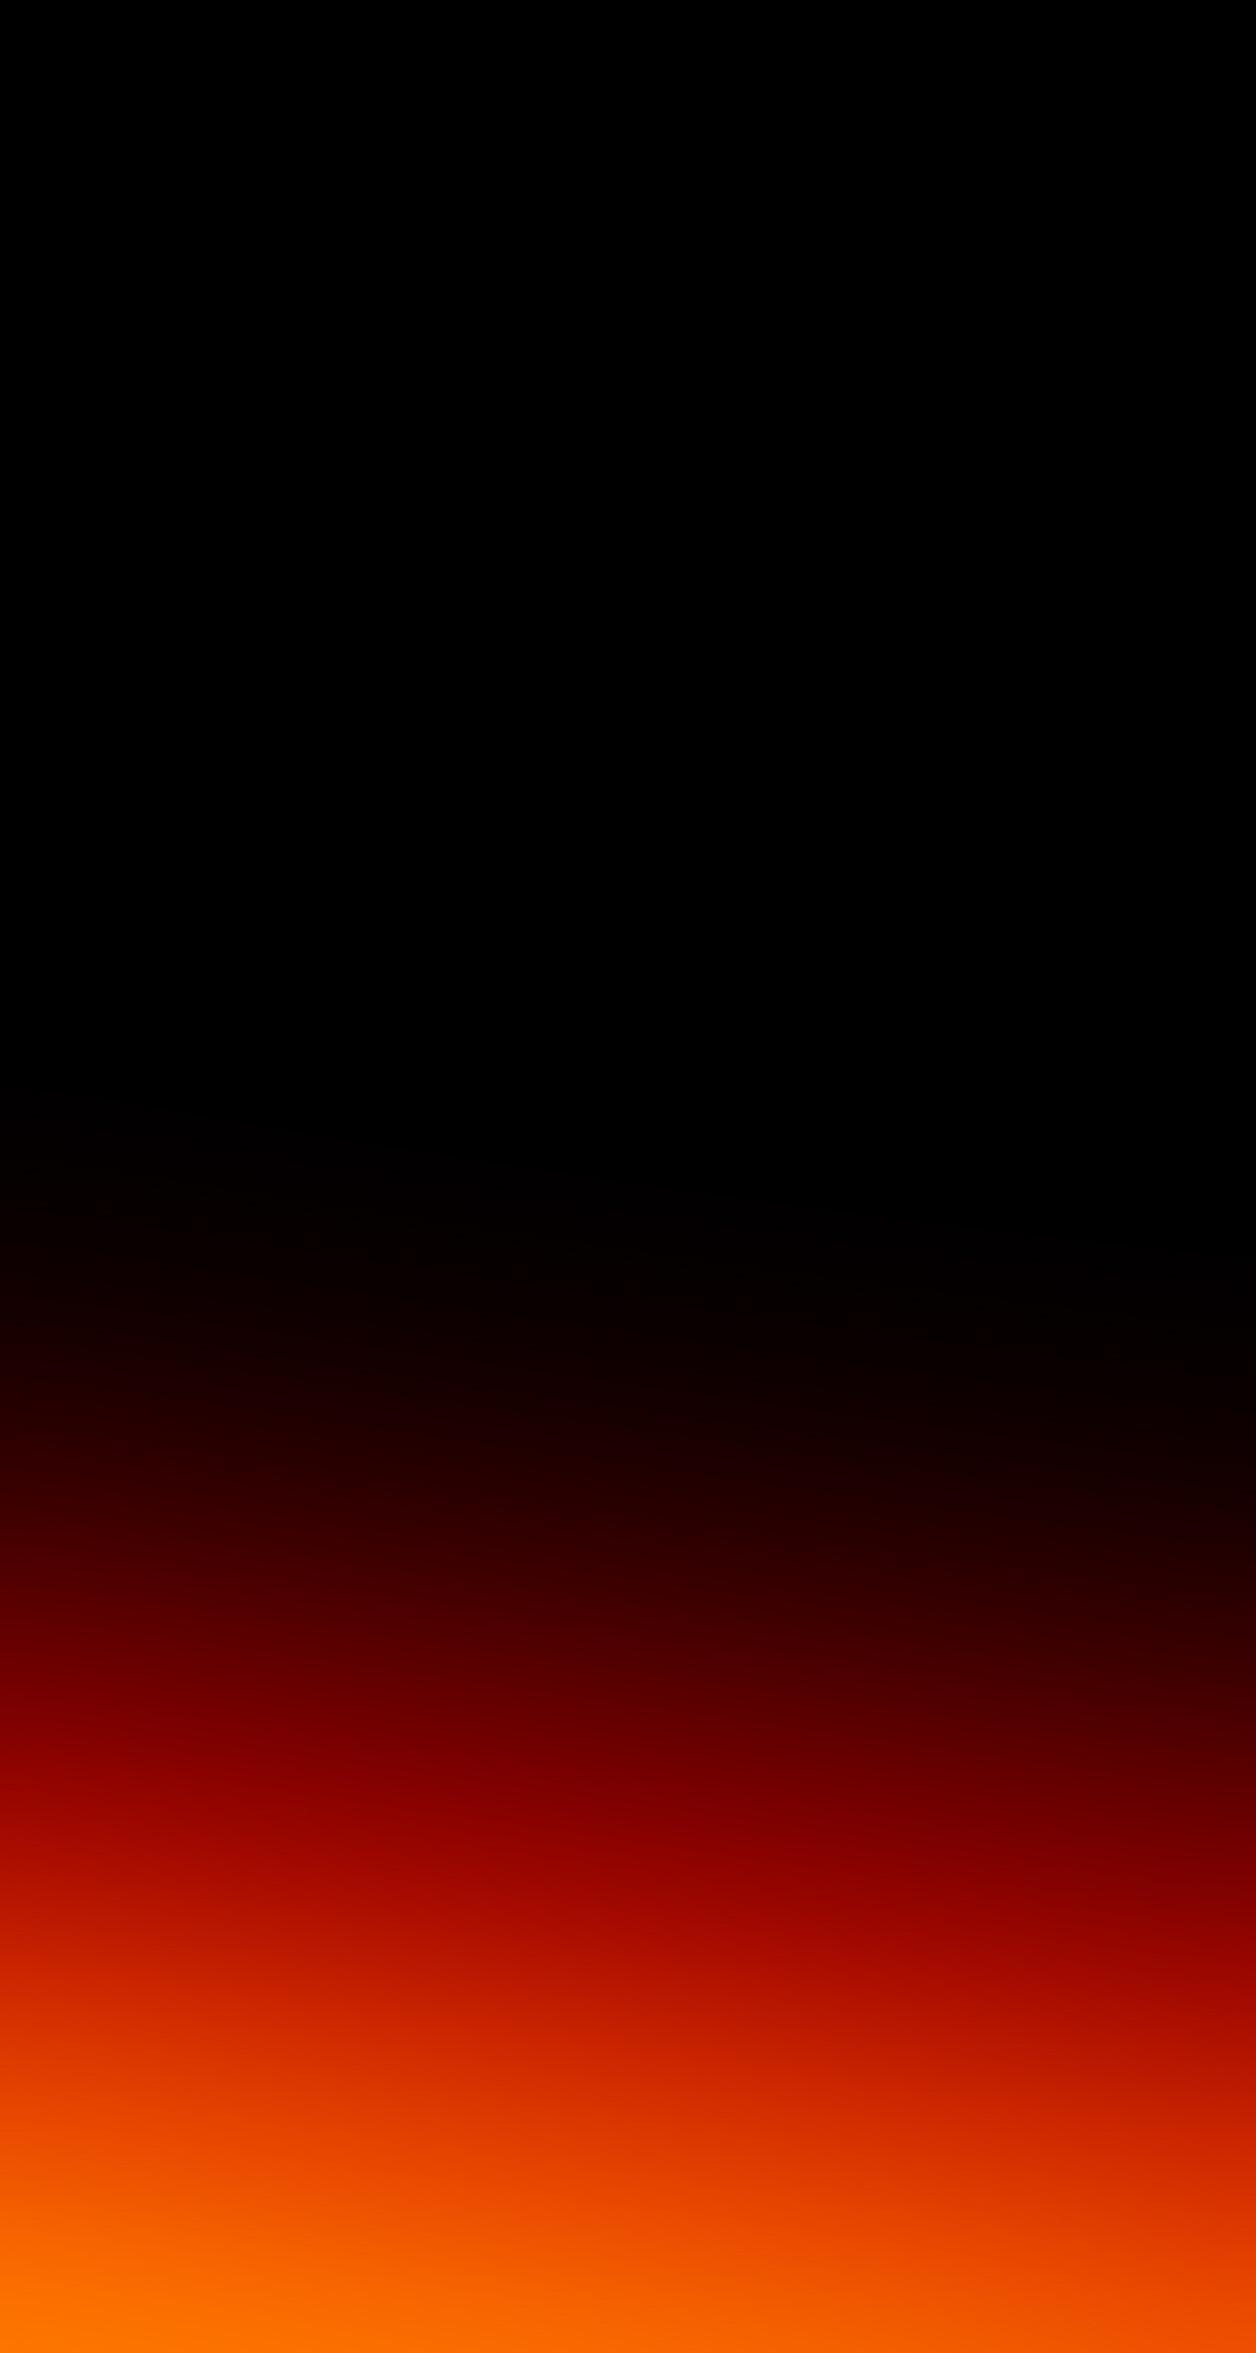 Orange Dark Red And Black Gradient Android Wallpapers - Wallpaper Cave